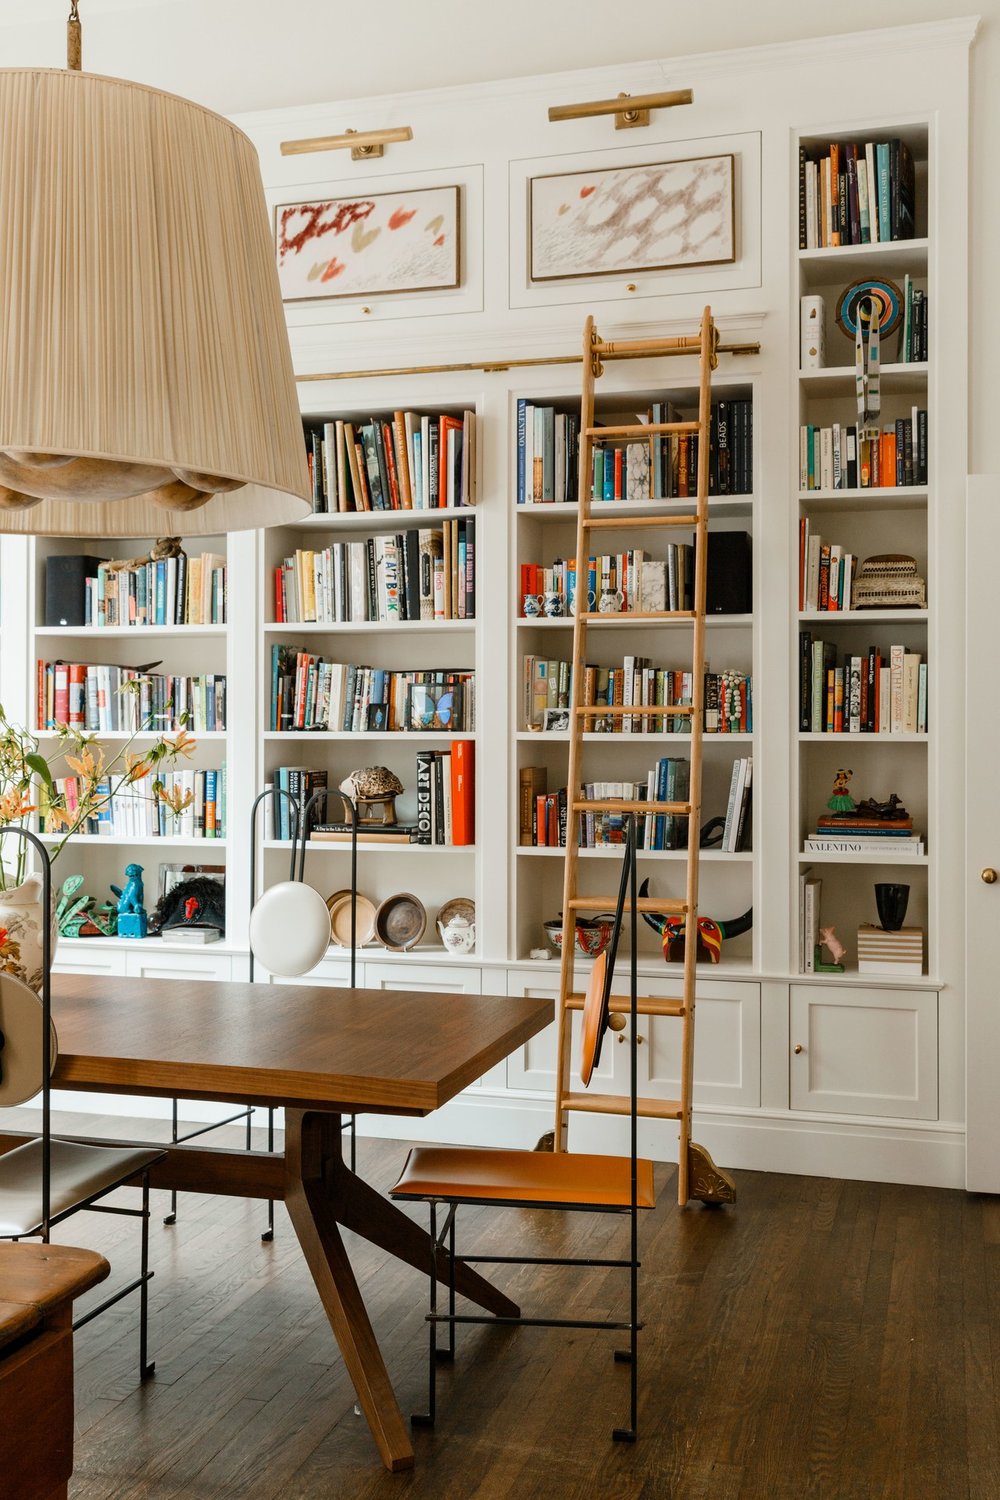 built in bookcase and library ladder in the dining room | james hirschfeld via arch digest